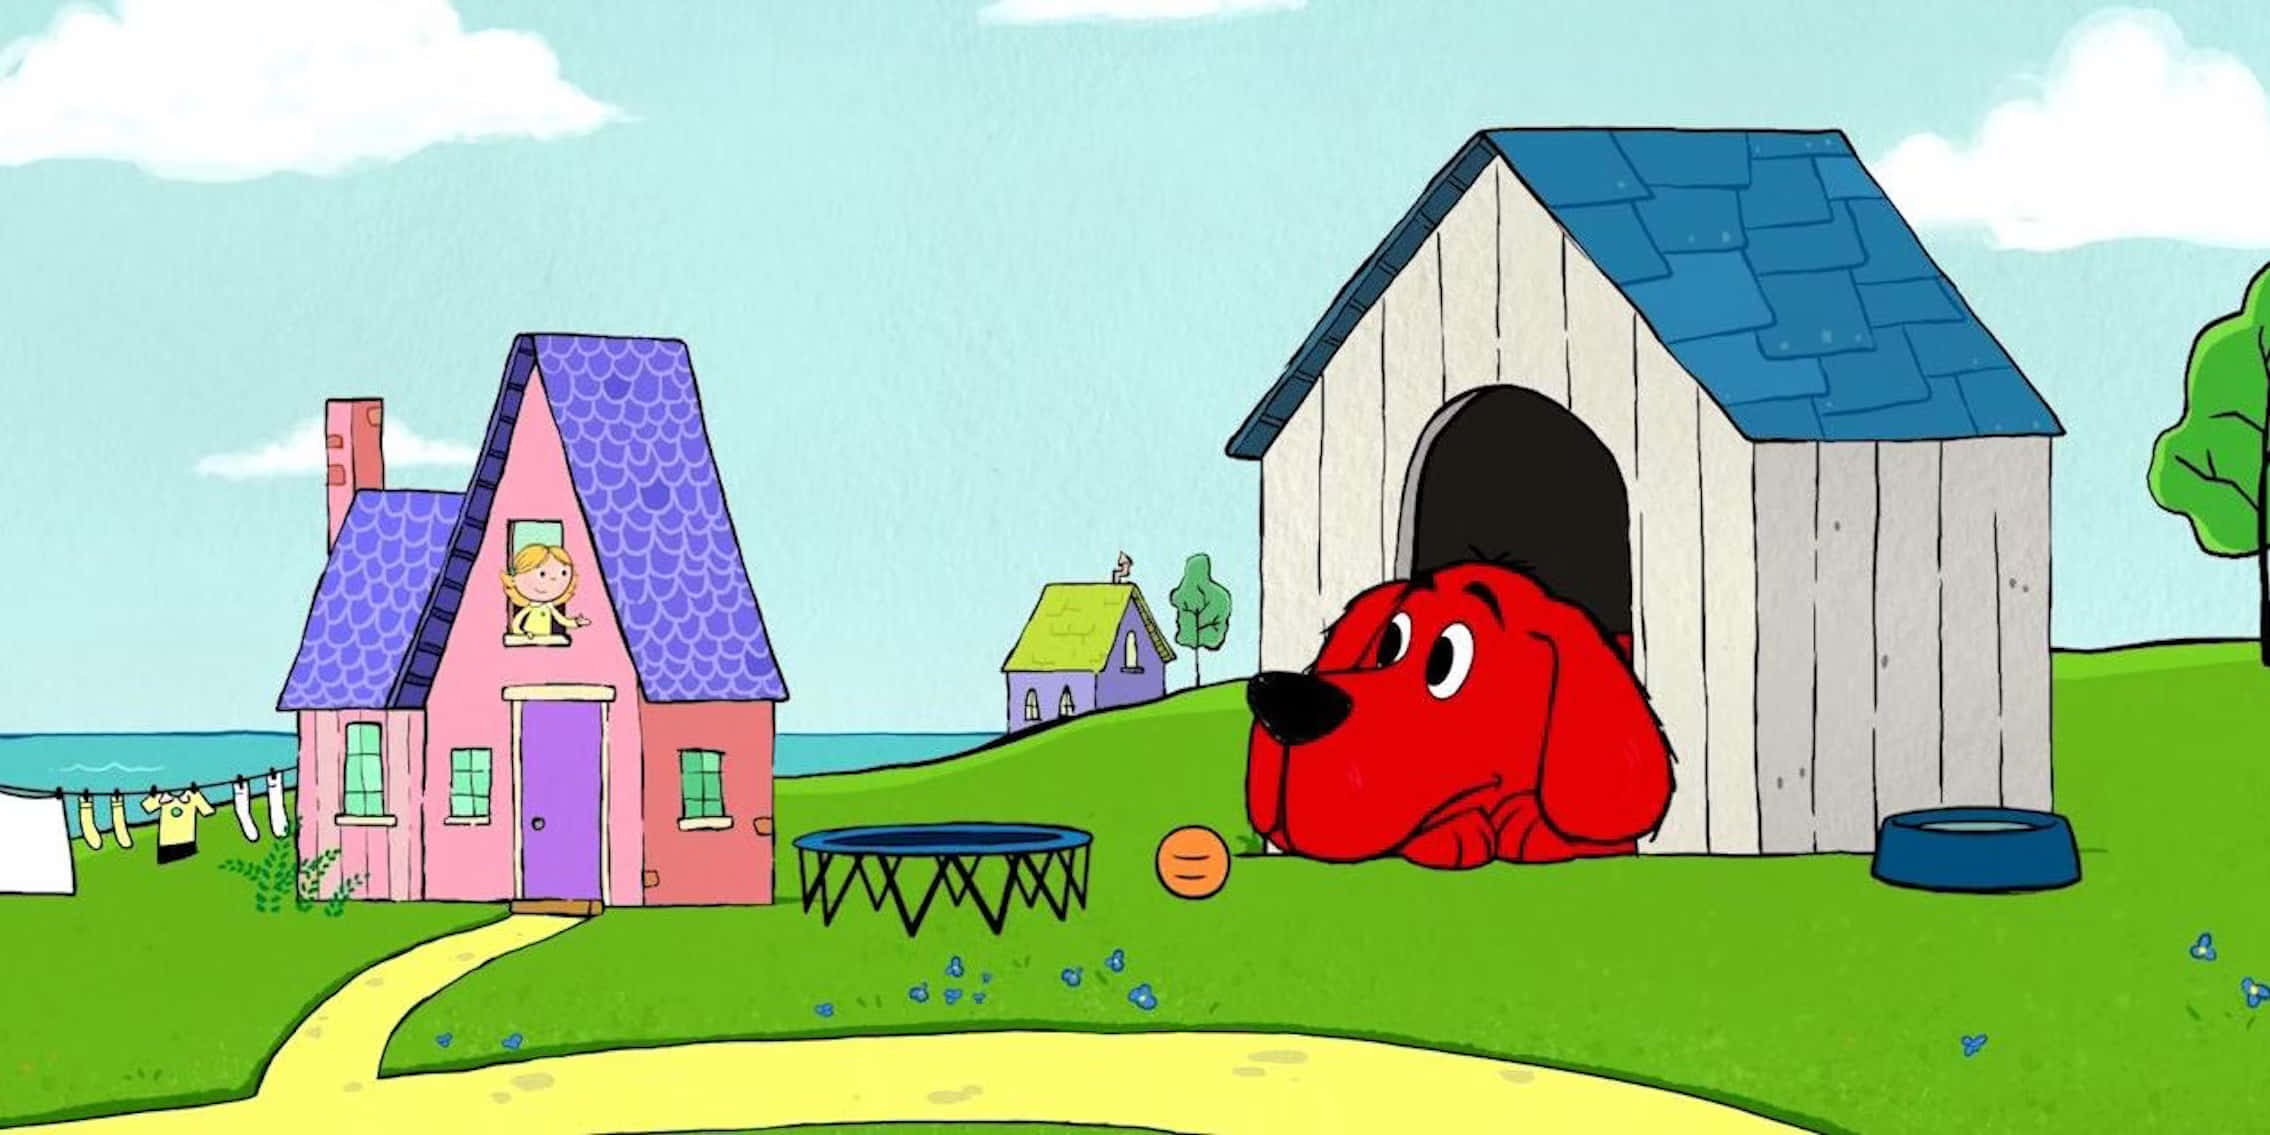 Clifford the Big Red Dog Can Make You Smile!